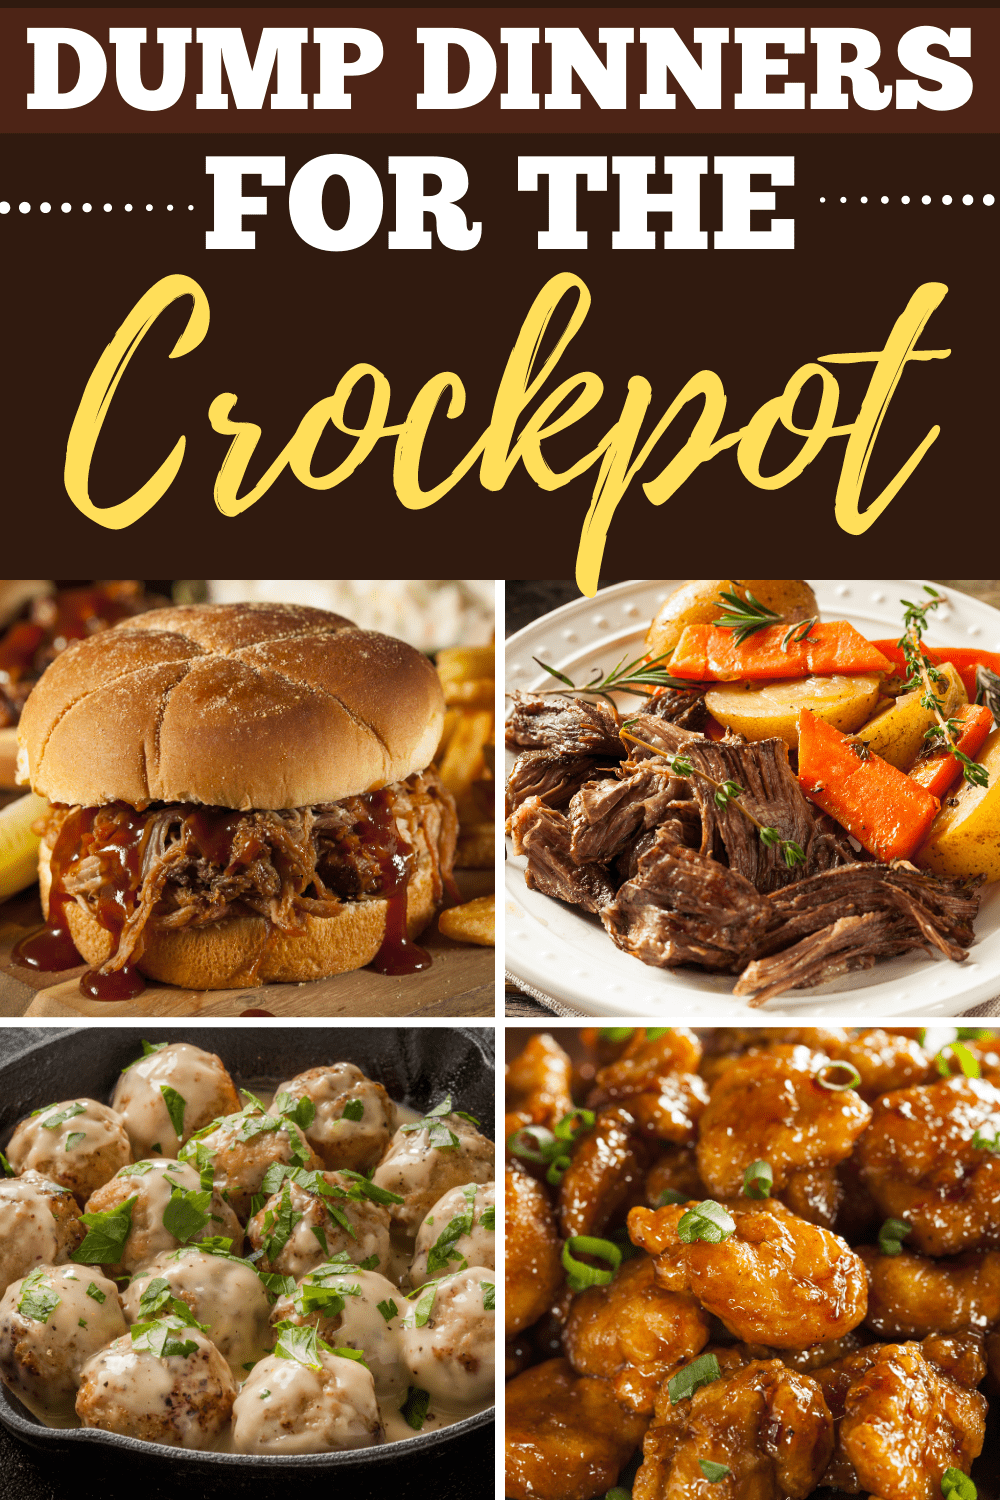 https://insanelygoodrecipes.com/wp-content/uploads/2021/03/Dump_Dinners_For_The_Crockpot.png